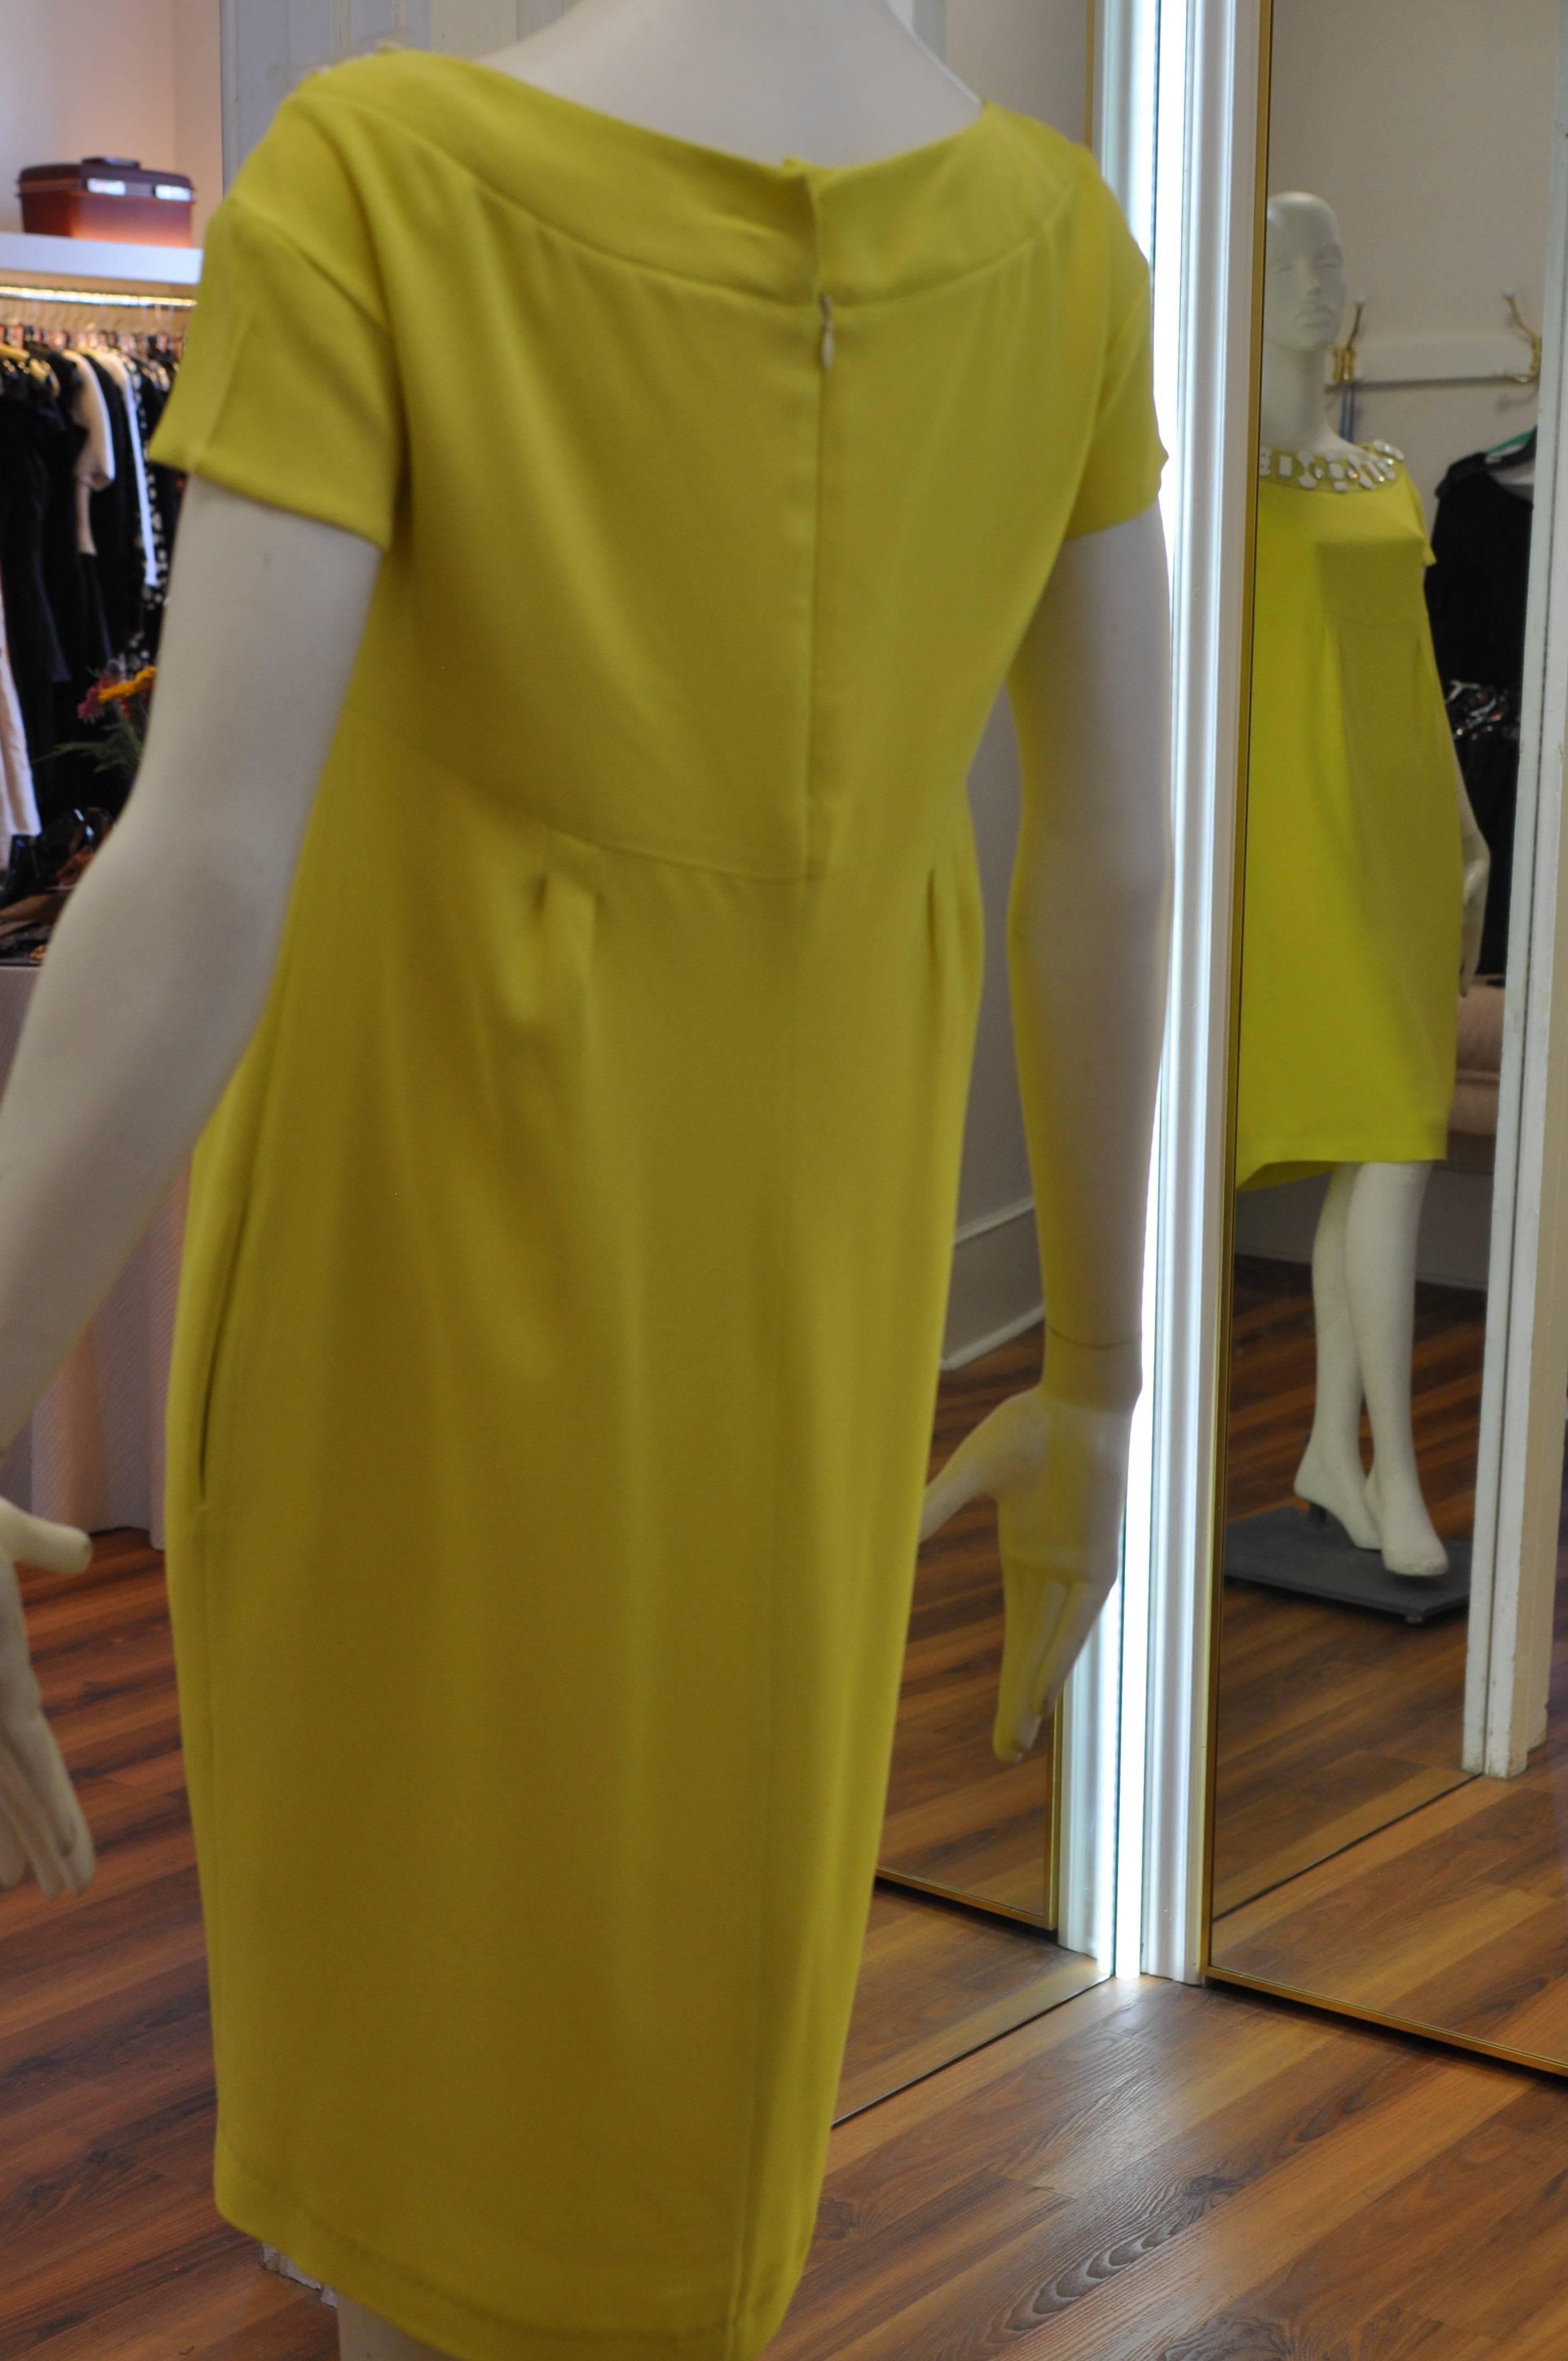 yellow dress with collar